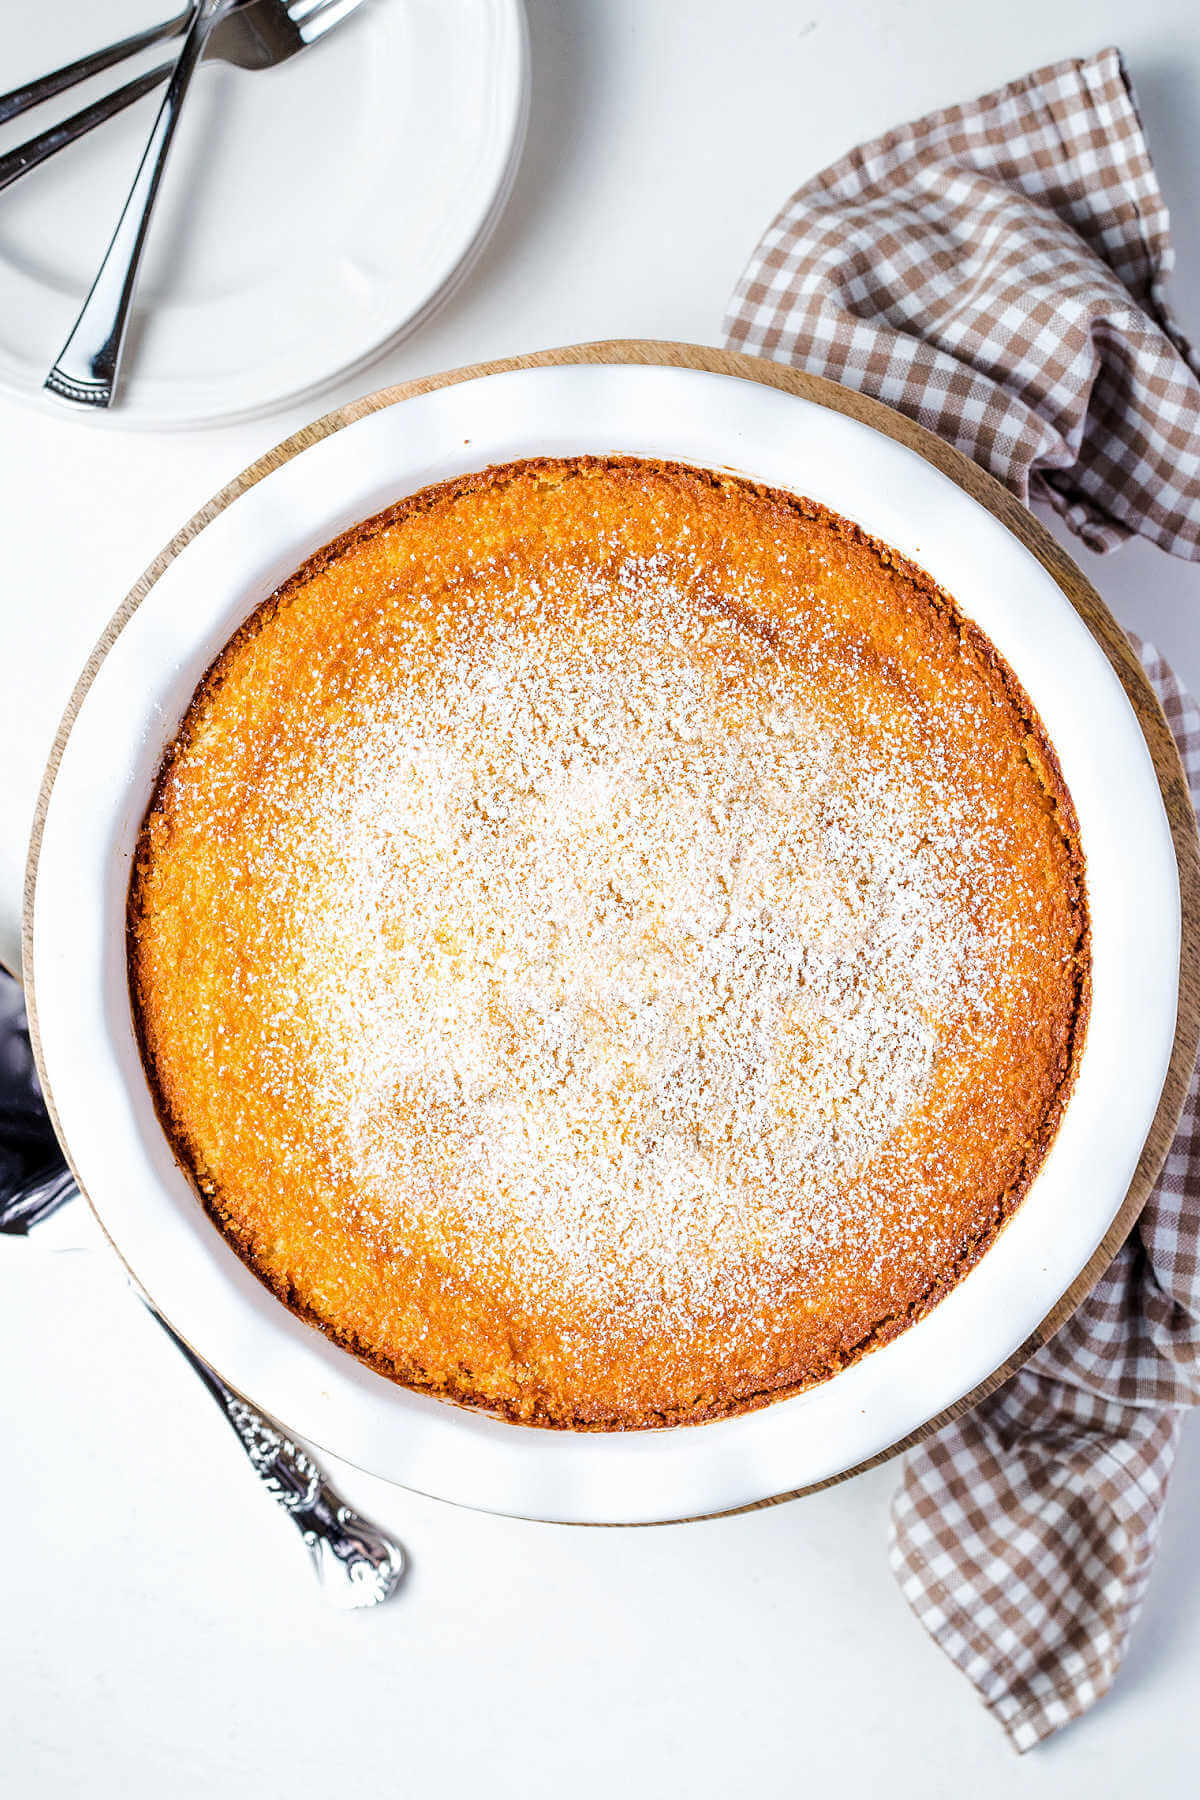 a whole impossible pie dusted with powdered sugar on a table.